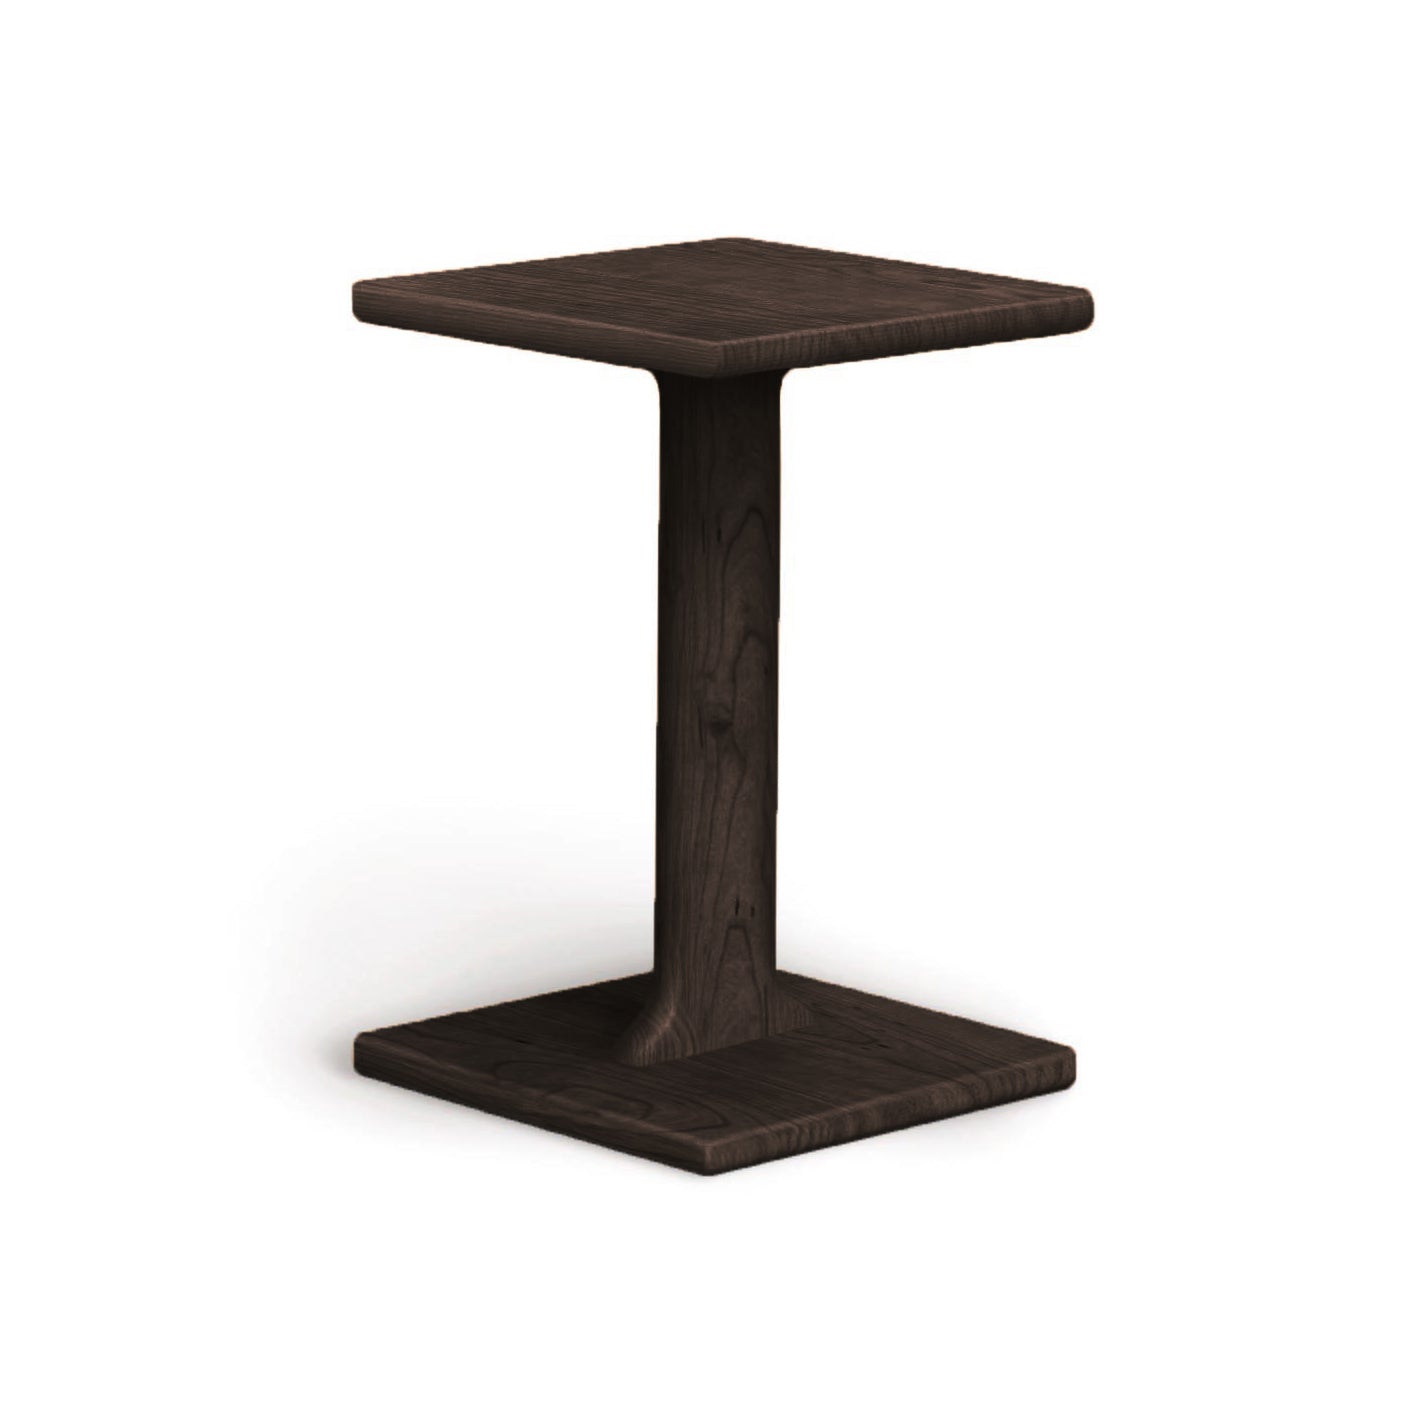 A square wooden Copeland Furniture Sierra Chair Table with a square base.